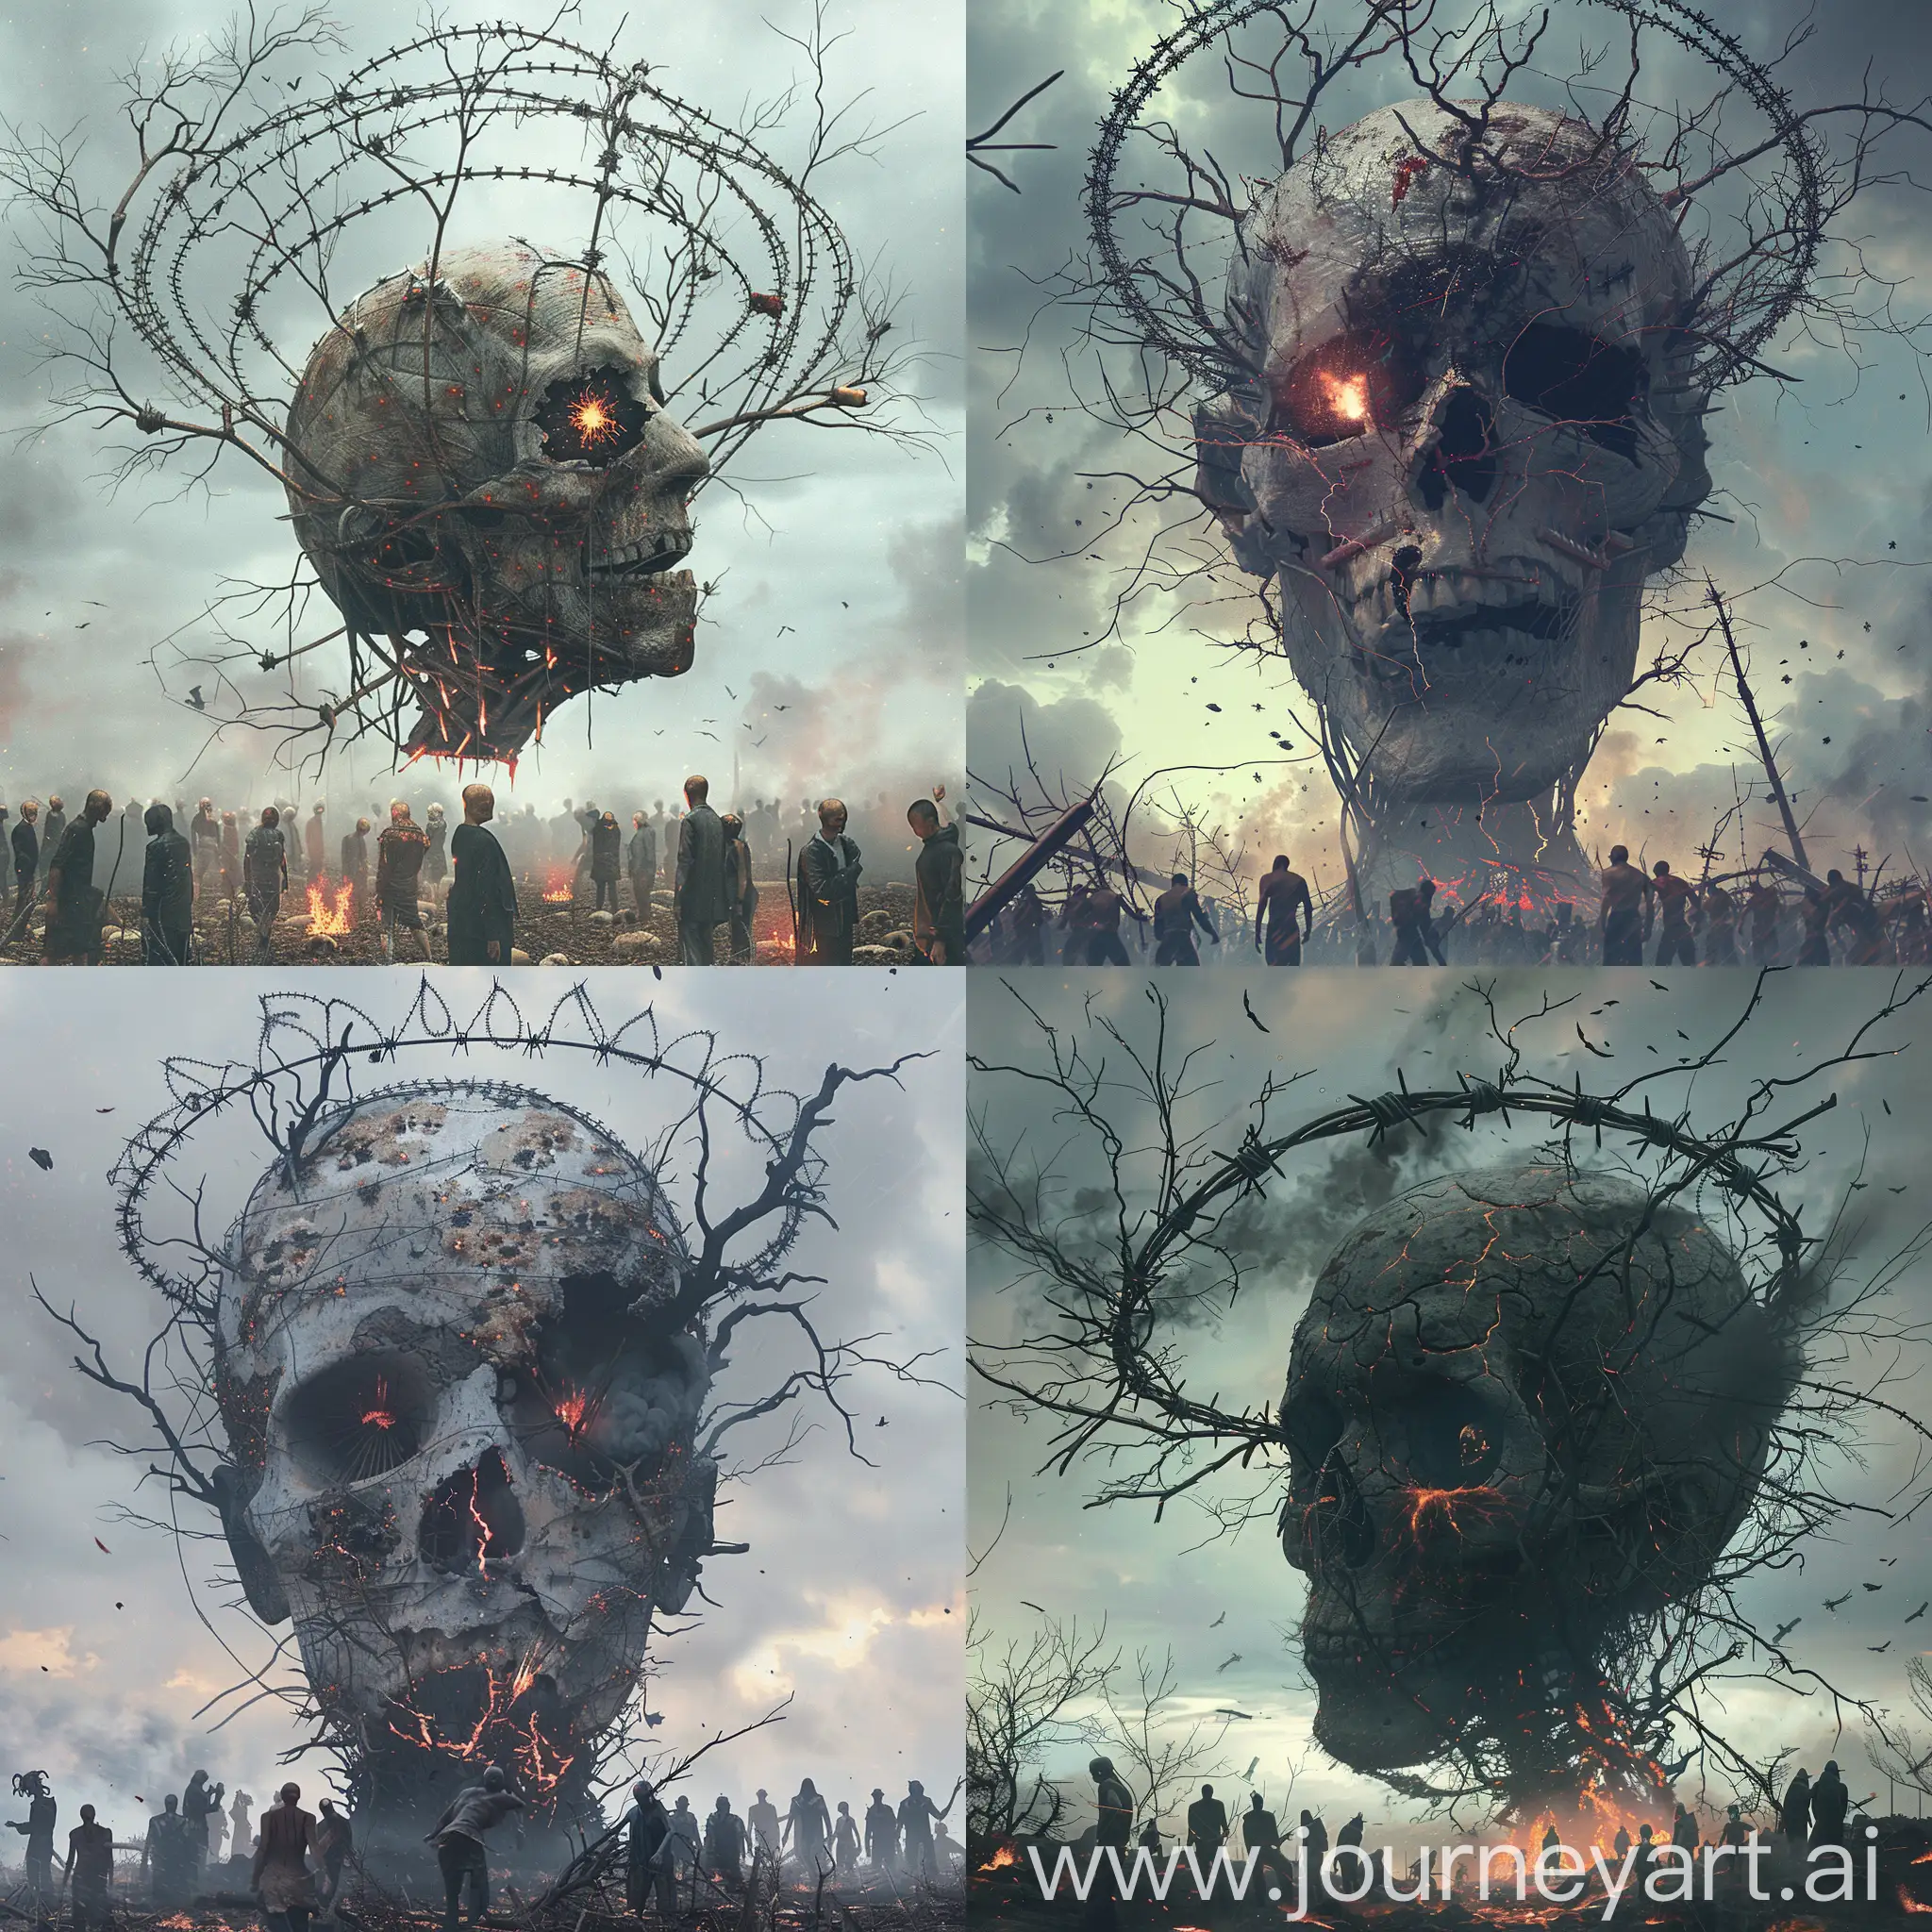 Apocalyptic-Sky-with-Giant-Skull-Head-and-Worshippers